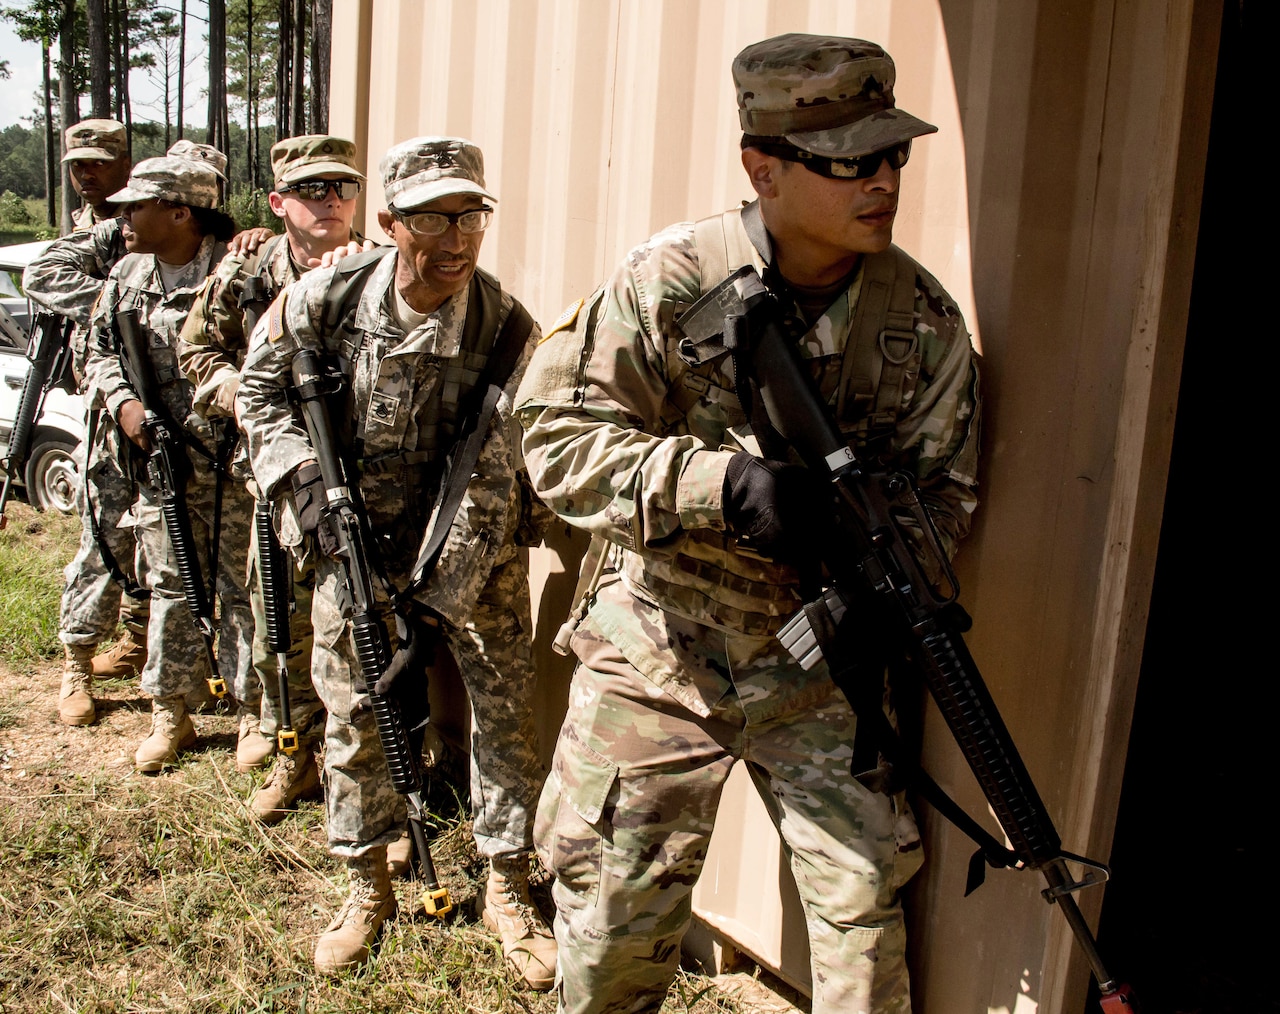 Soldiers prepare to clear a building during an urban operations familiarization event at Fort McClellan, Ala.